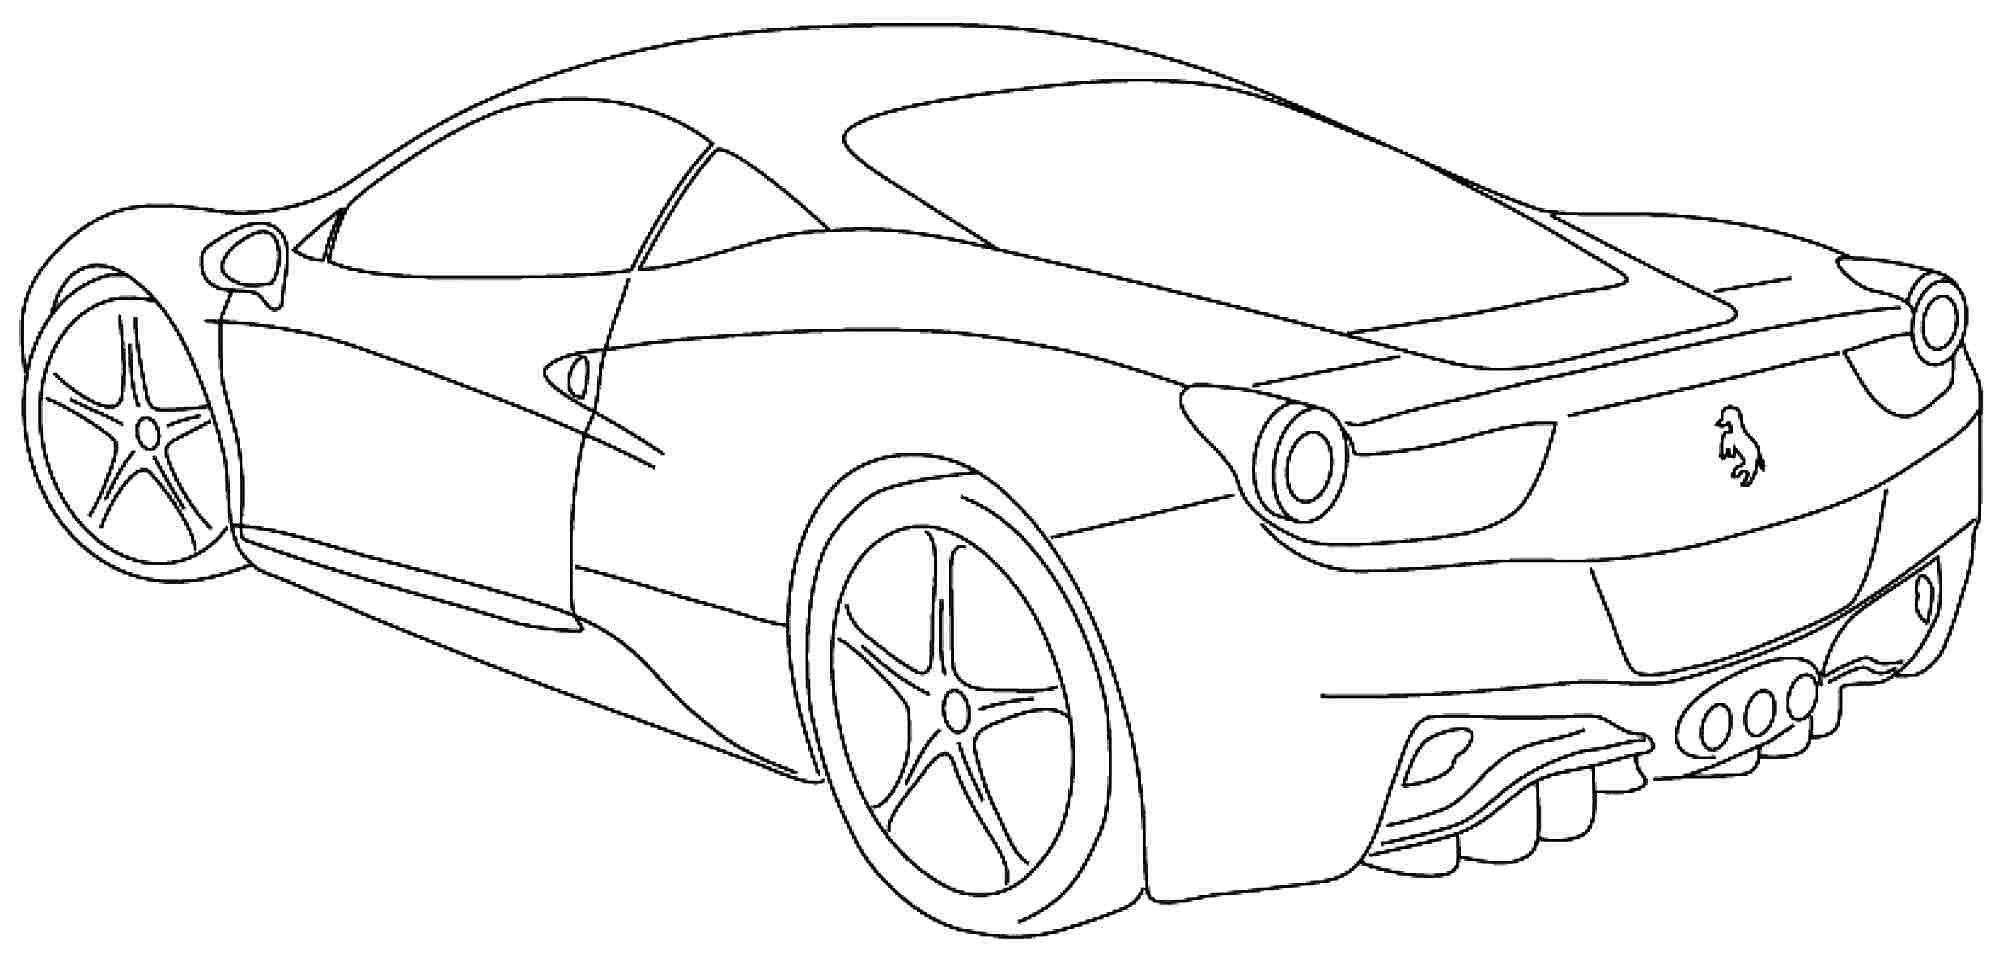 Coloring Sheets For Boys Cars
 Sports Cars Coloring Pages For Boys – Color Bros